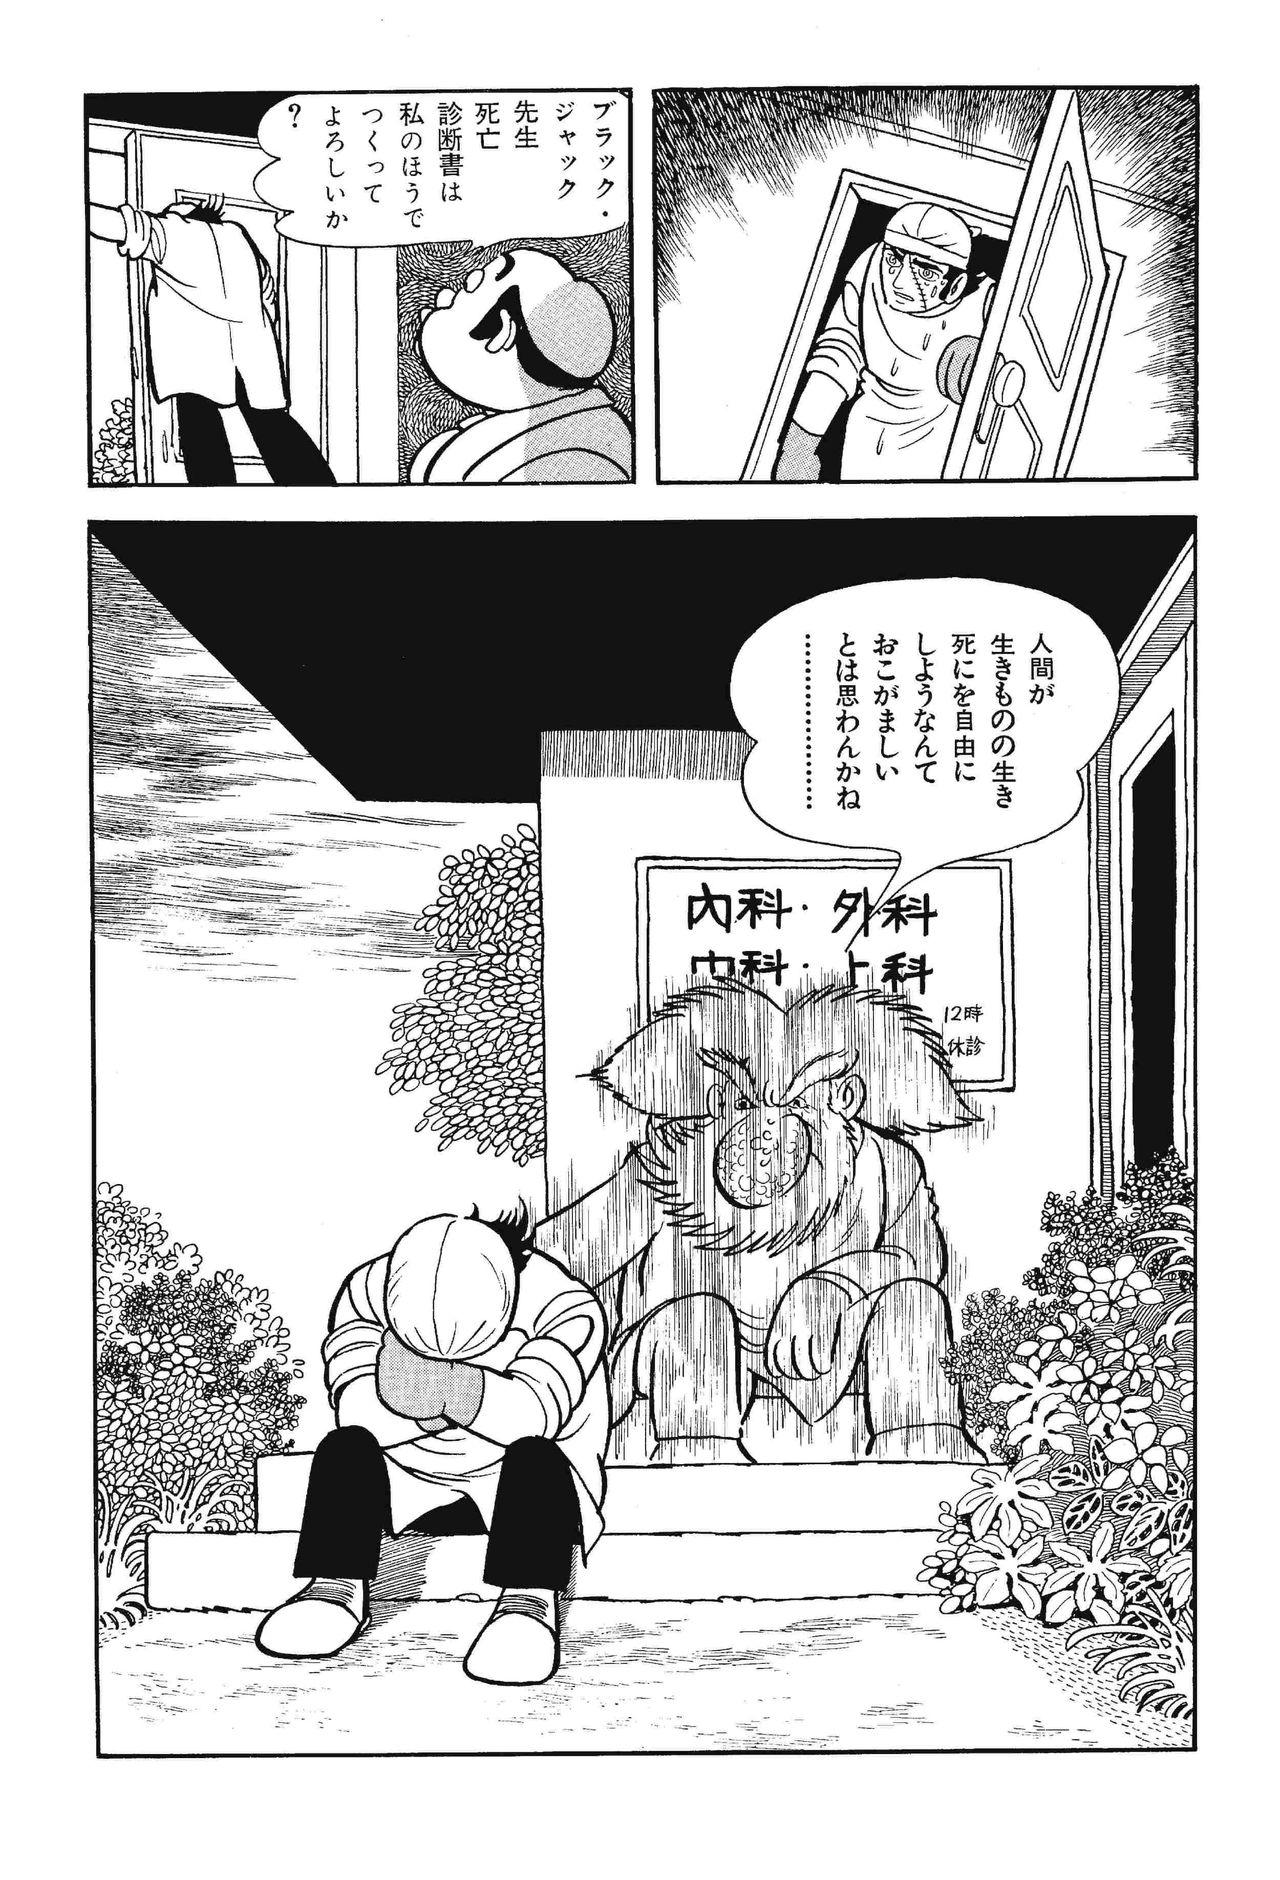 A famed scene from the manga in which the spirit of Doctor Honma speaks to Black Jack, delivering the line at the top of this article, after the loss of a surgery patient. (© Tezuka Productions)